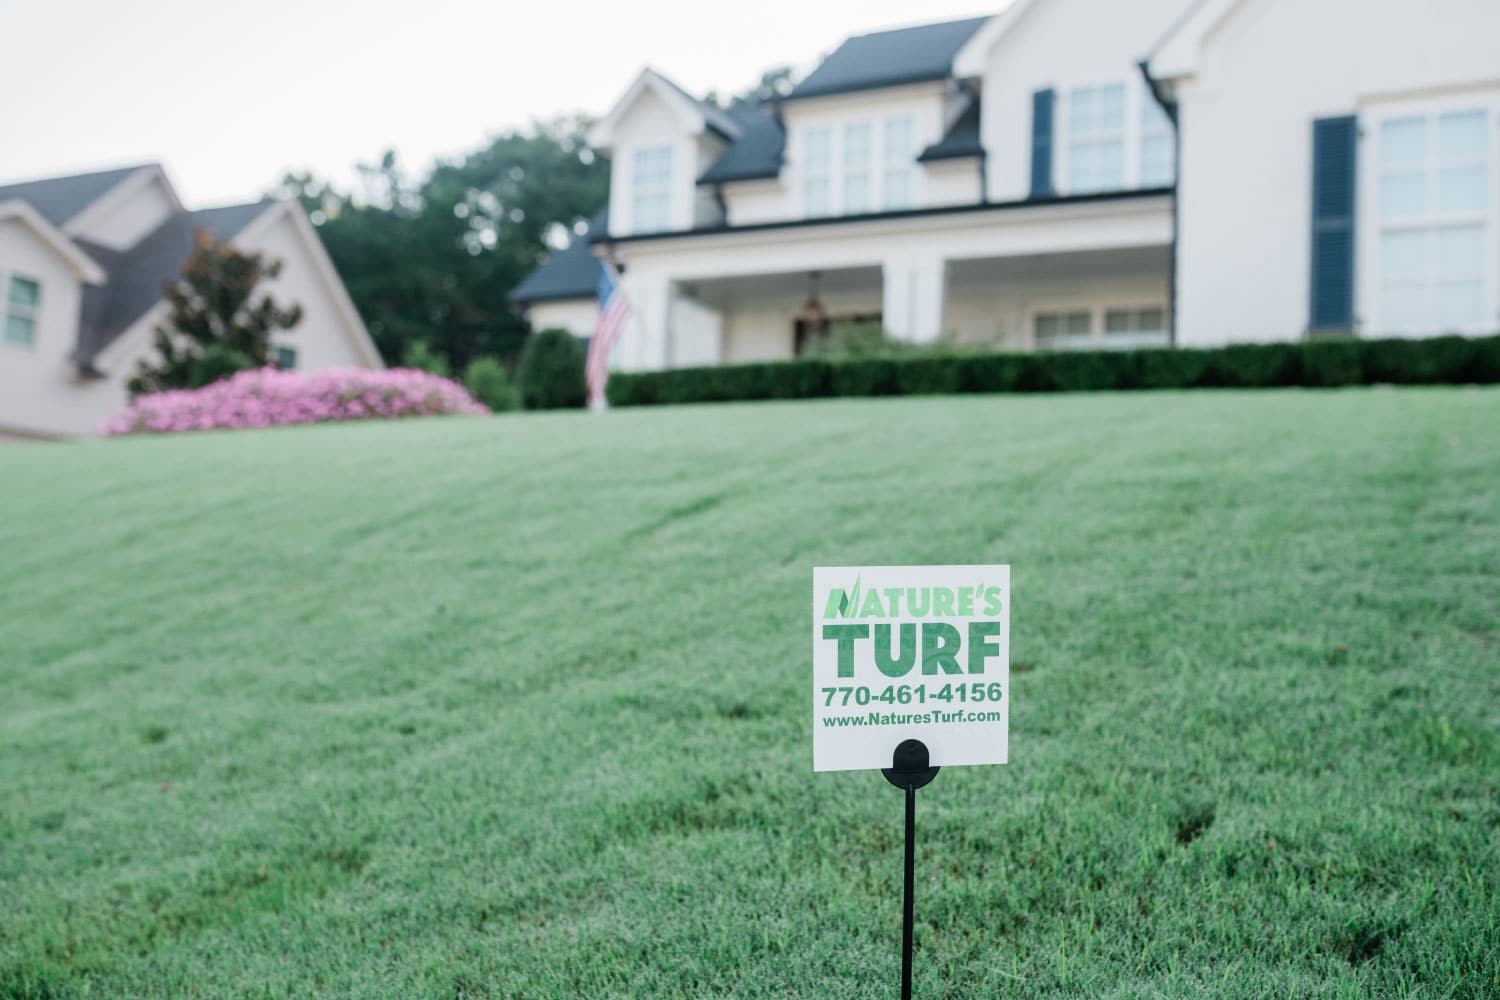 Nature's Turf yard sign in a lush, green lawn in front of a white, modern home with an American flag in front